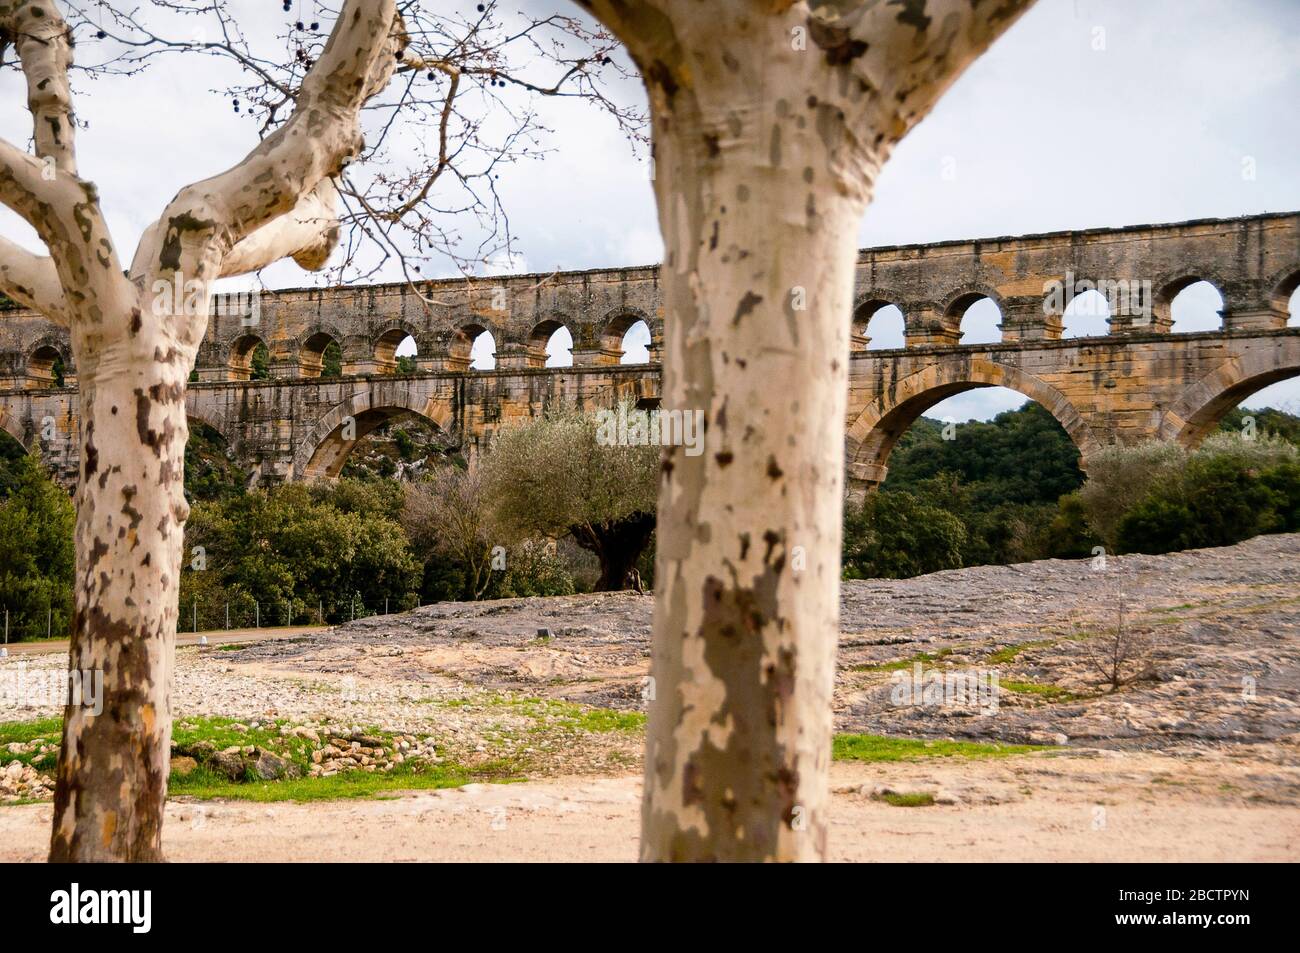 Pont du Gard in Southern France is an ancient Roman aqueduct that crosses the Gardon River bringing water to Nîmes. Stock Photo